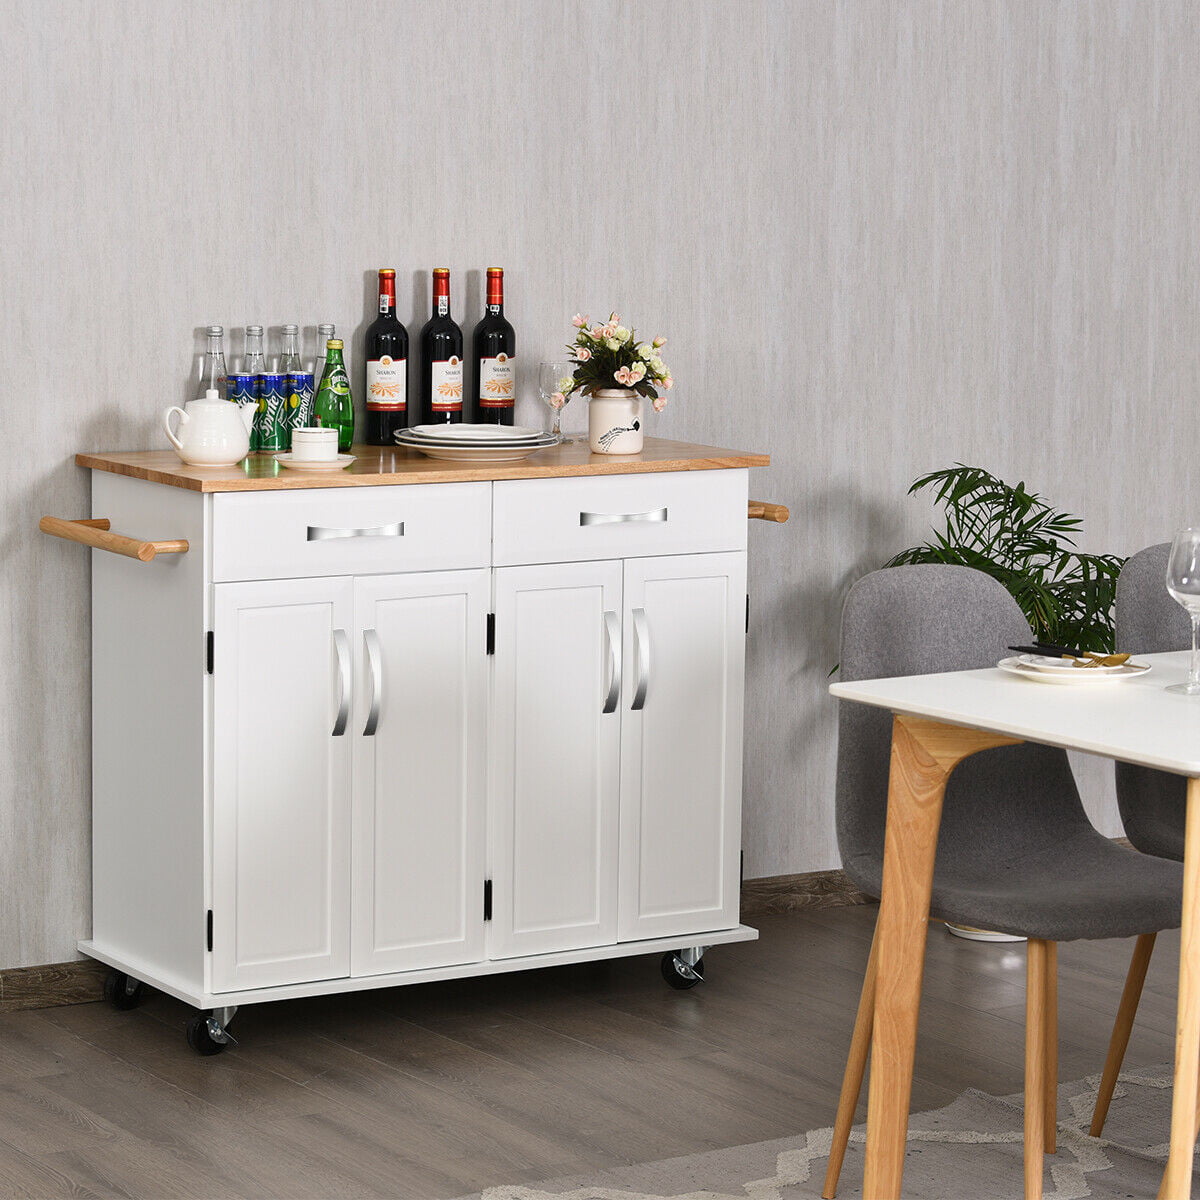 Costway Kitchen Trolley Island Utility Cart Wood Top Rolling Storage Cabinet Drawers White